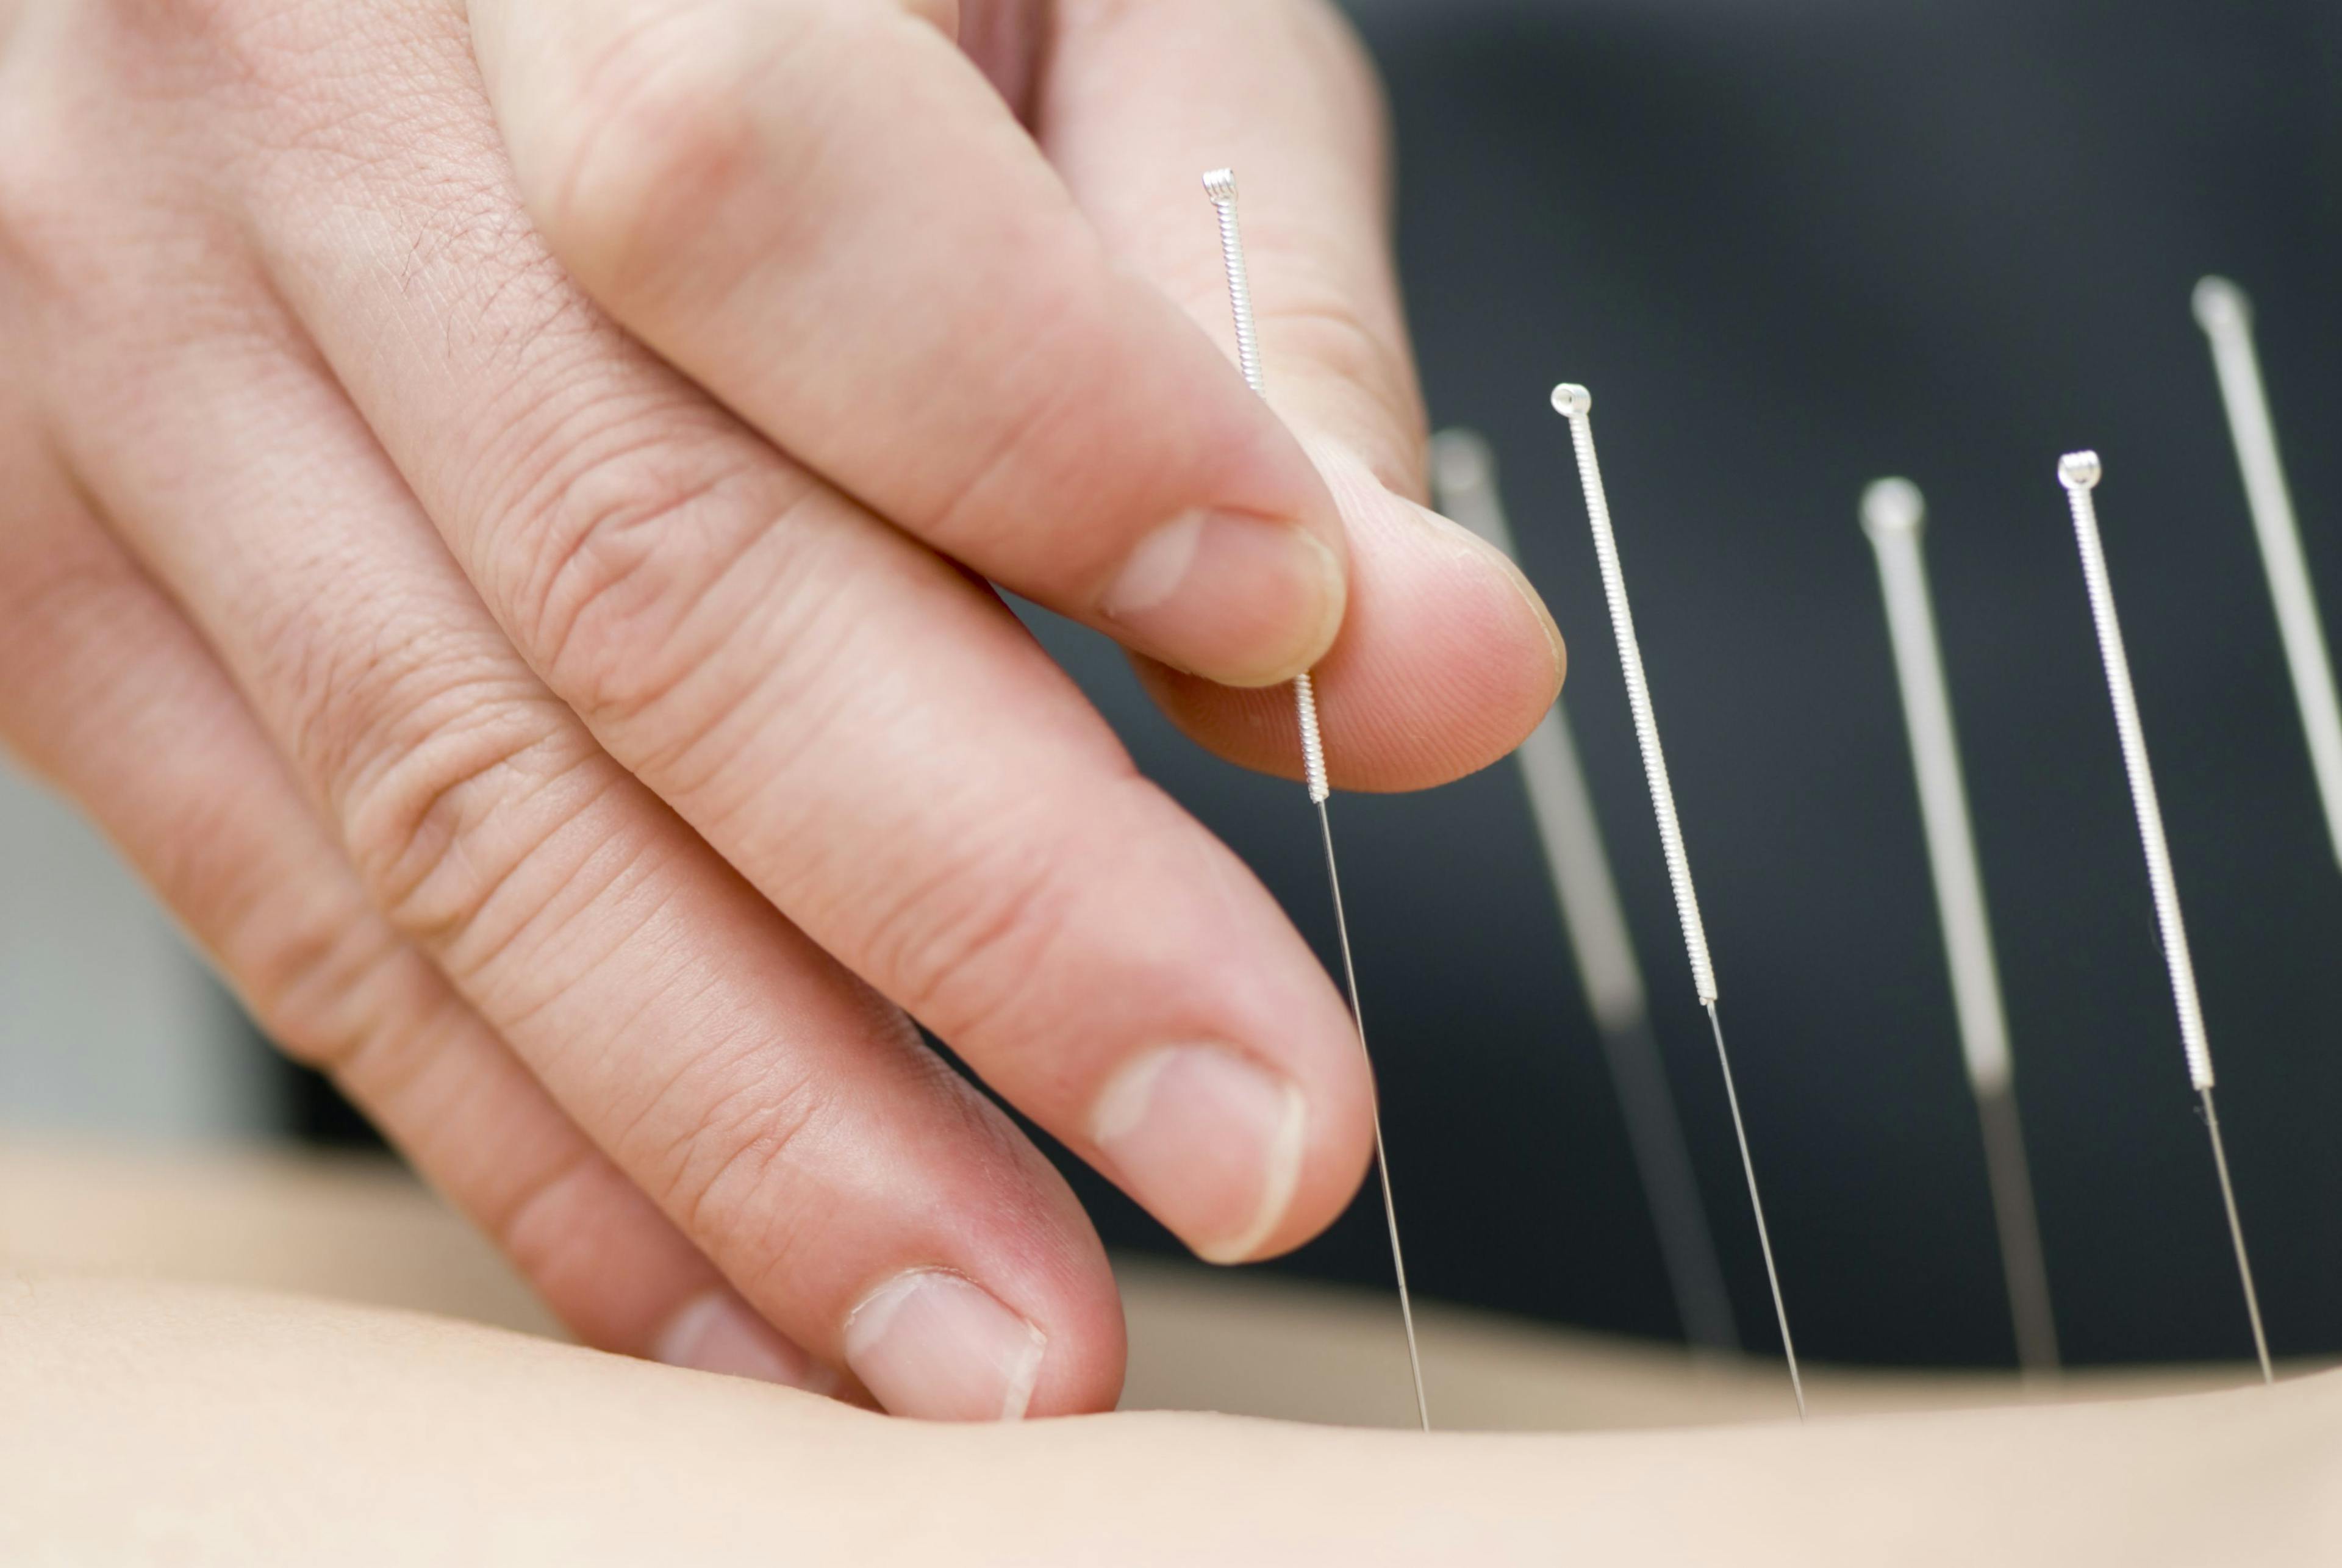 Acupuncture May Reduce Chronic Pain in Cancer Survivors